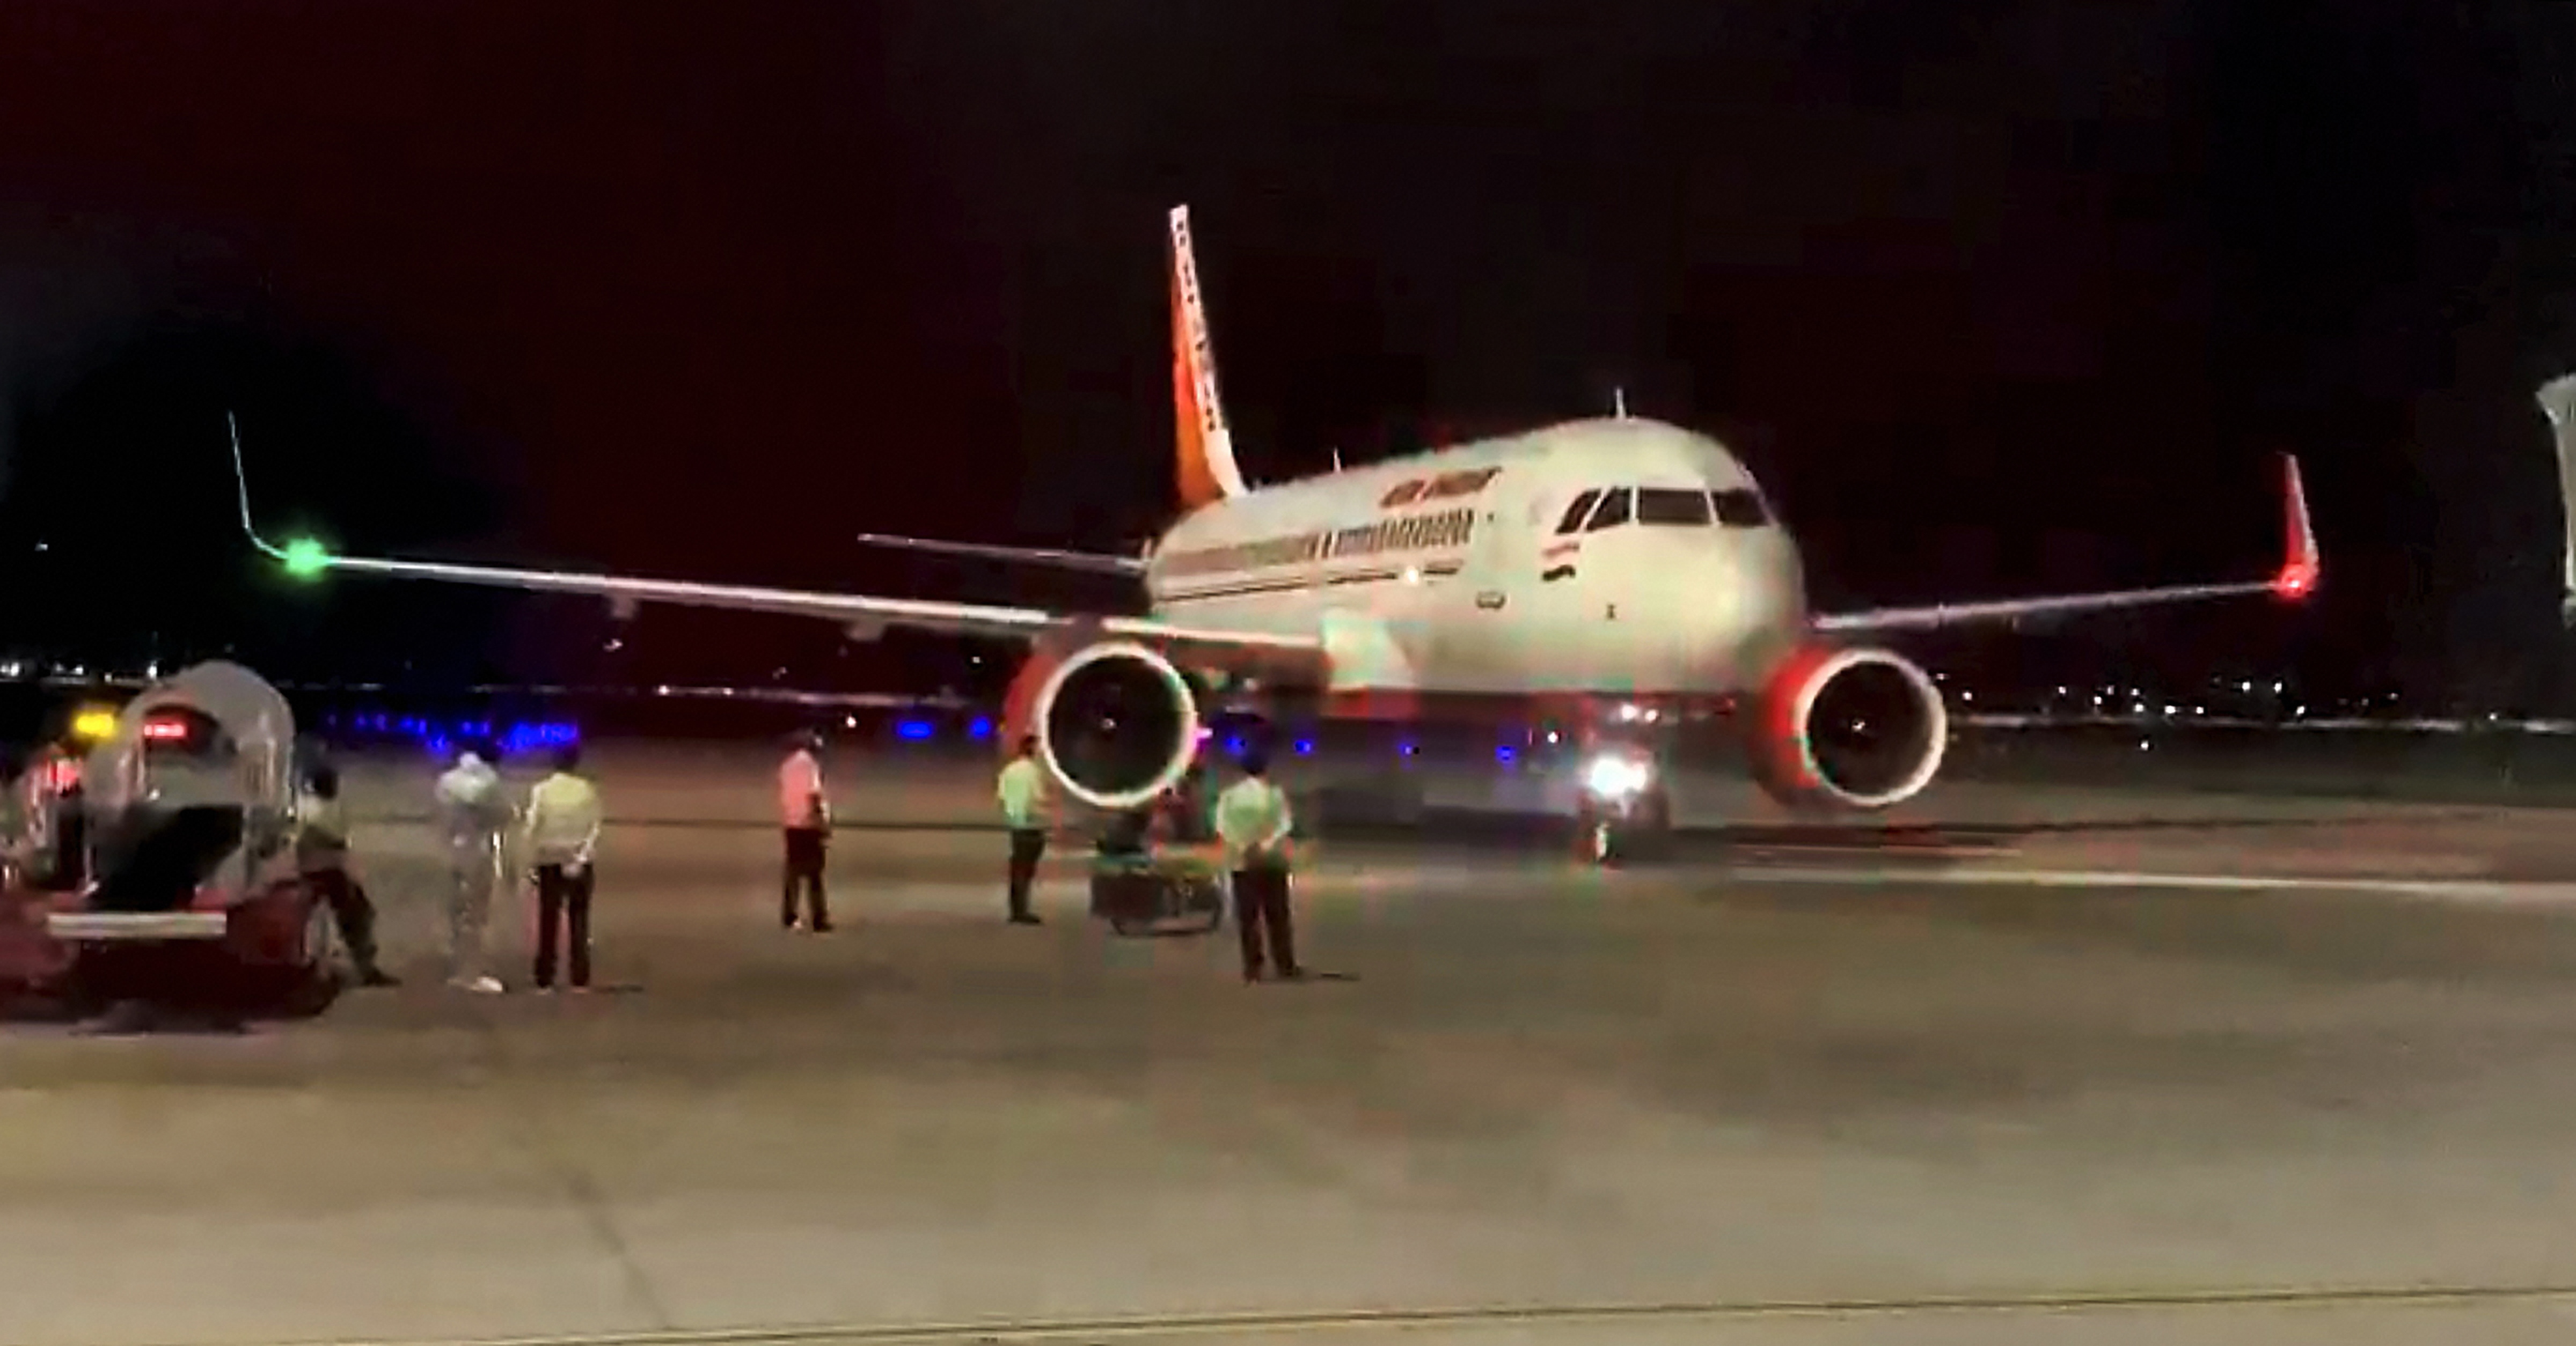 An Air India flight carrying 125 passengers from Kyrgyzstan arrives at Devi Ahilya Bai Holkar Airport under the Vande Bharat Mission in Indore on June 21